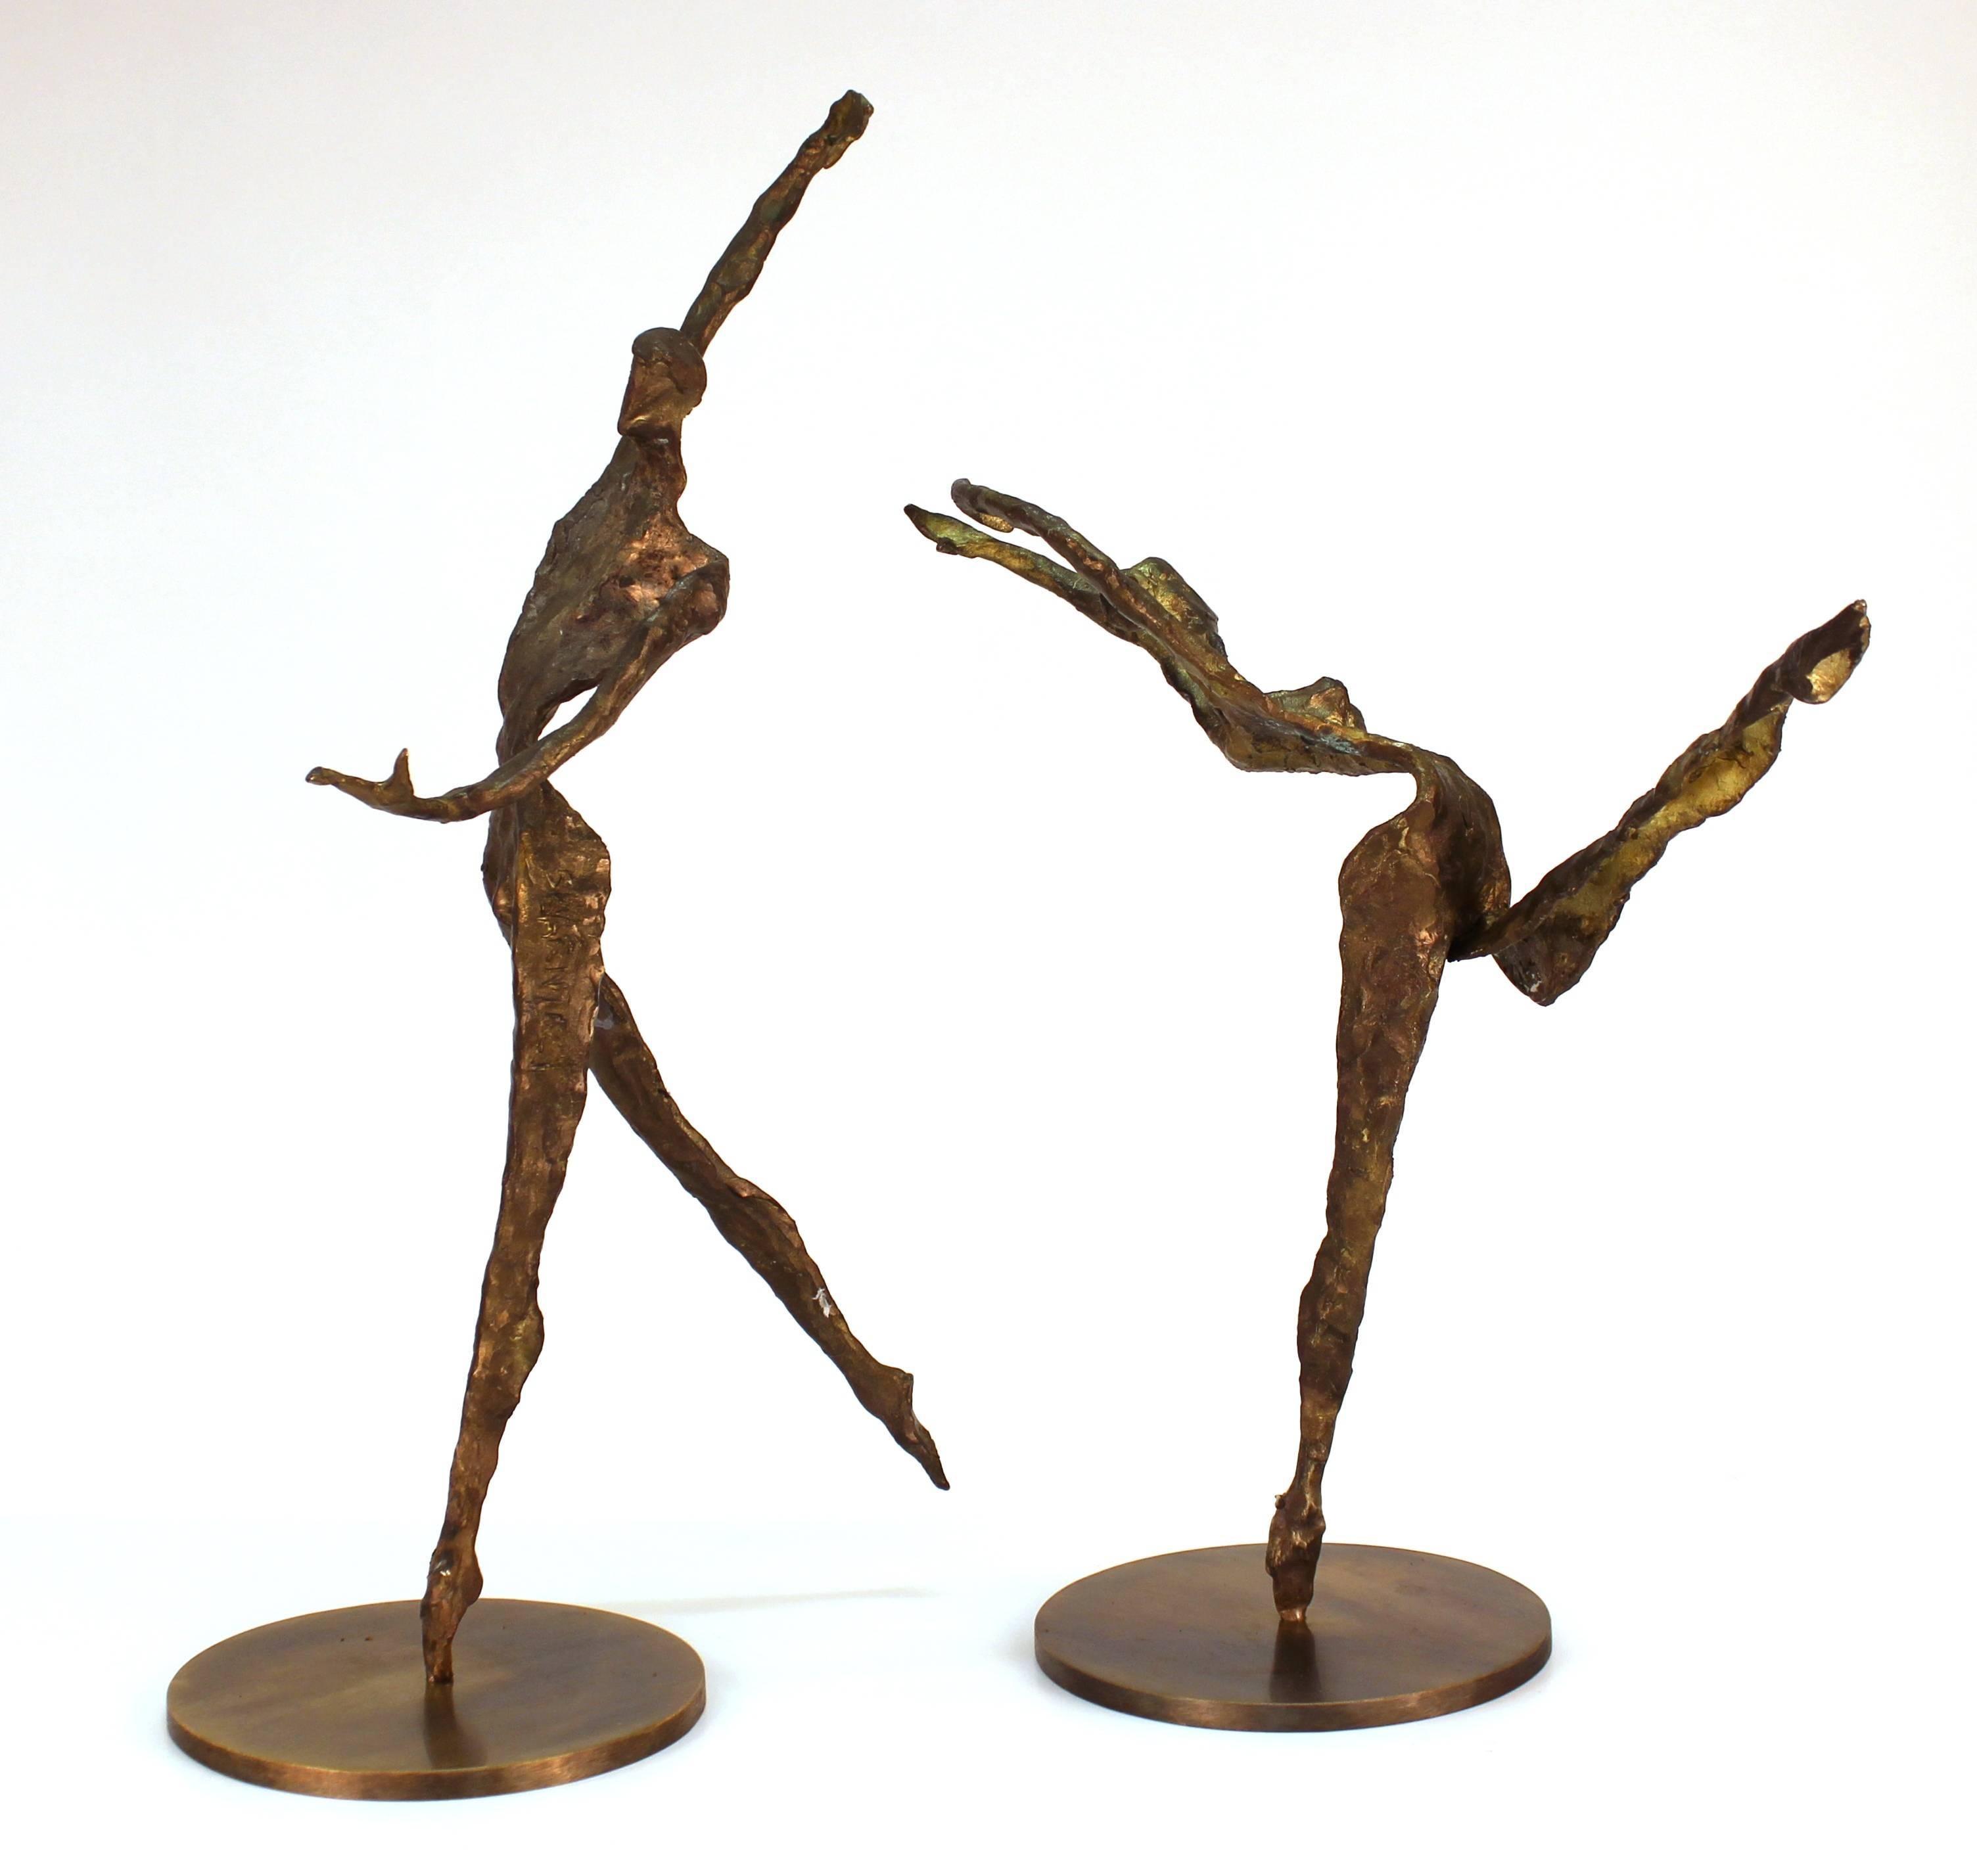 A modern pair of bronze sculptures of a duo of dancers in movement, sculpted in an Expressionist figurative manner and fixed atop circular bronze bases. There is a signature on the upper leg of the female dancer. The pair is in great vintage